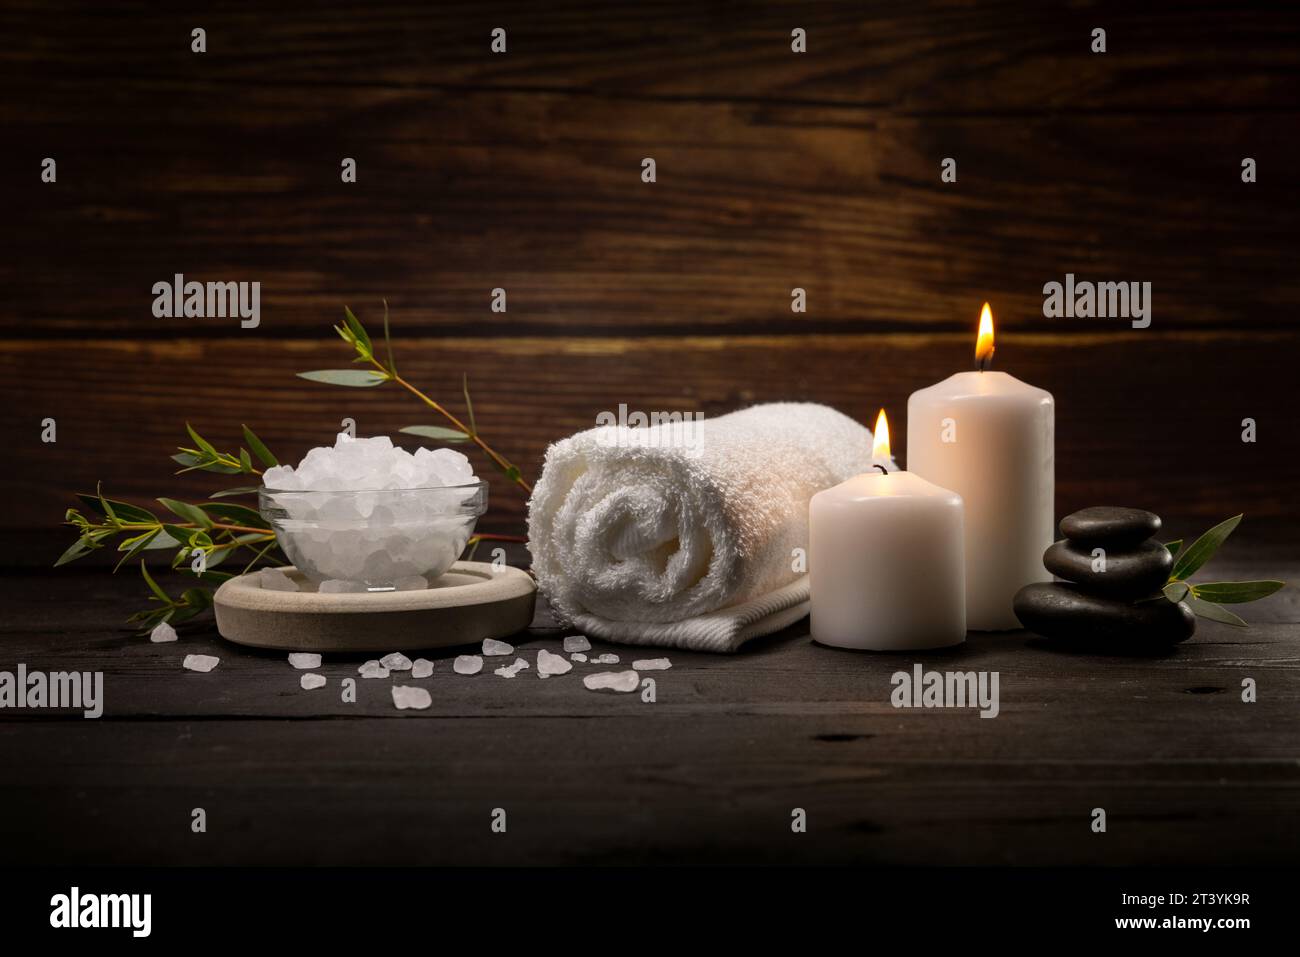 wellness spa. body skin care items on dark wooden table. towel, bath crystals, massage stones and candle Stock Photo